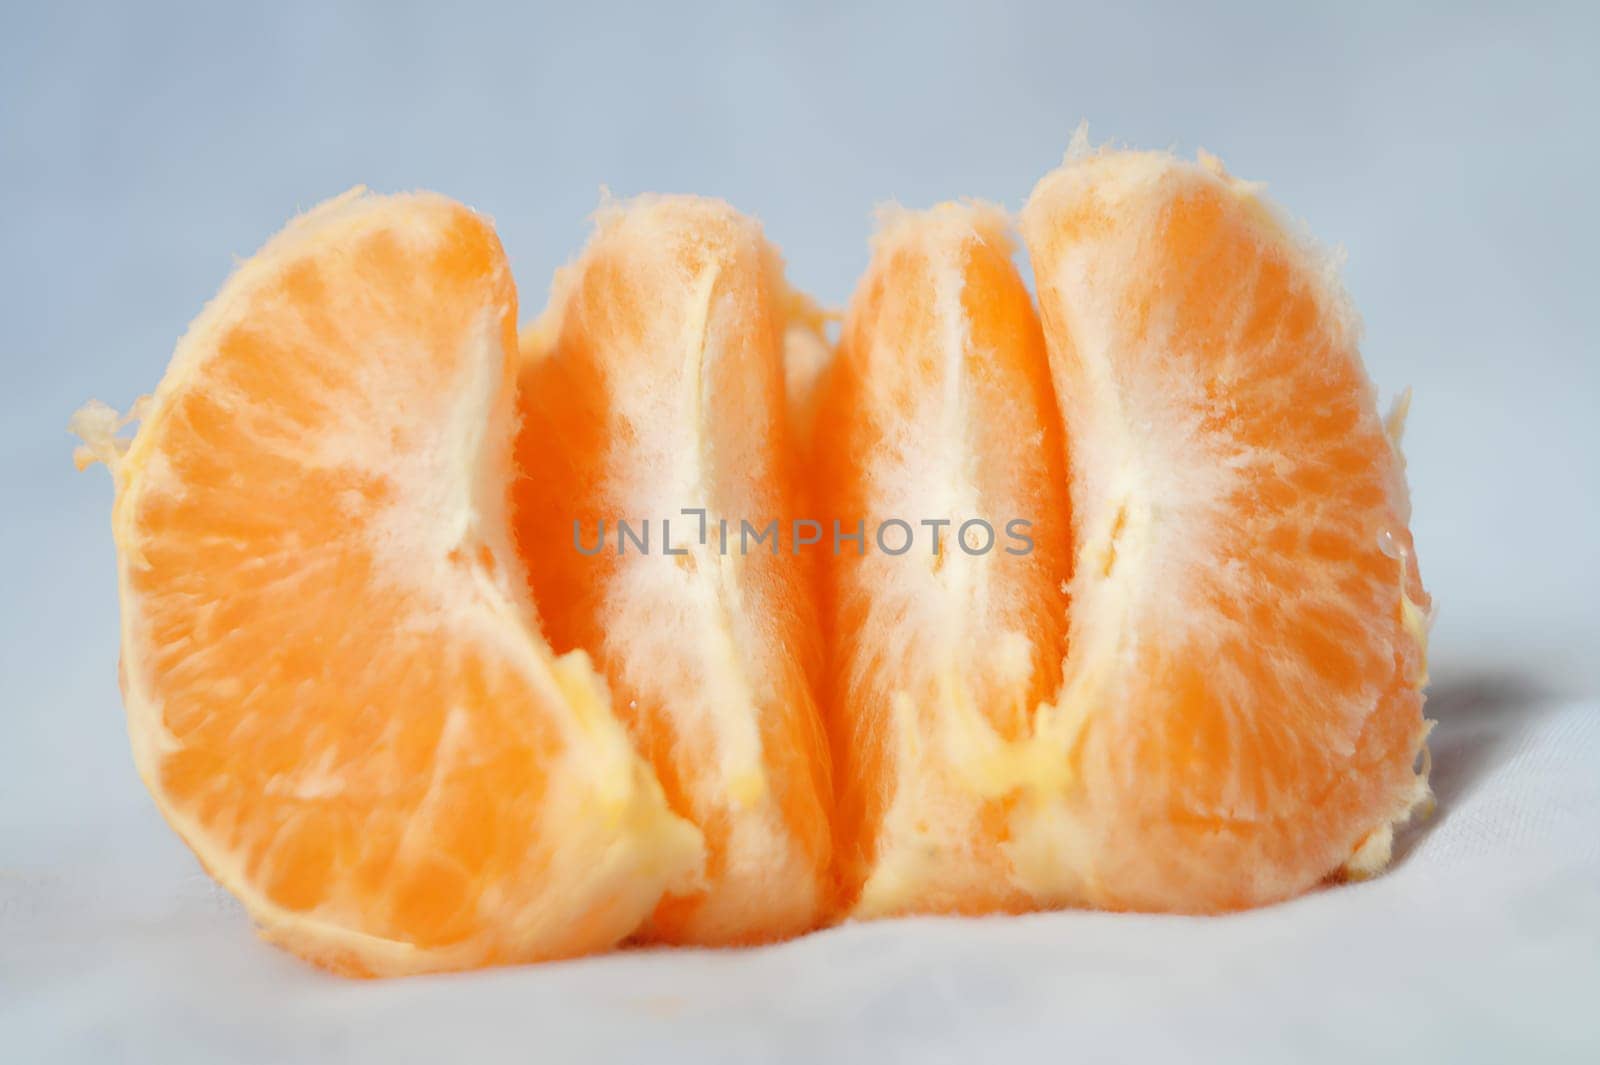 A peeled orange with the top cut off. High quality photo